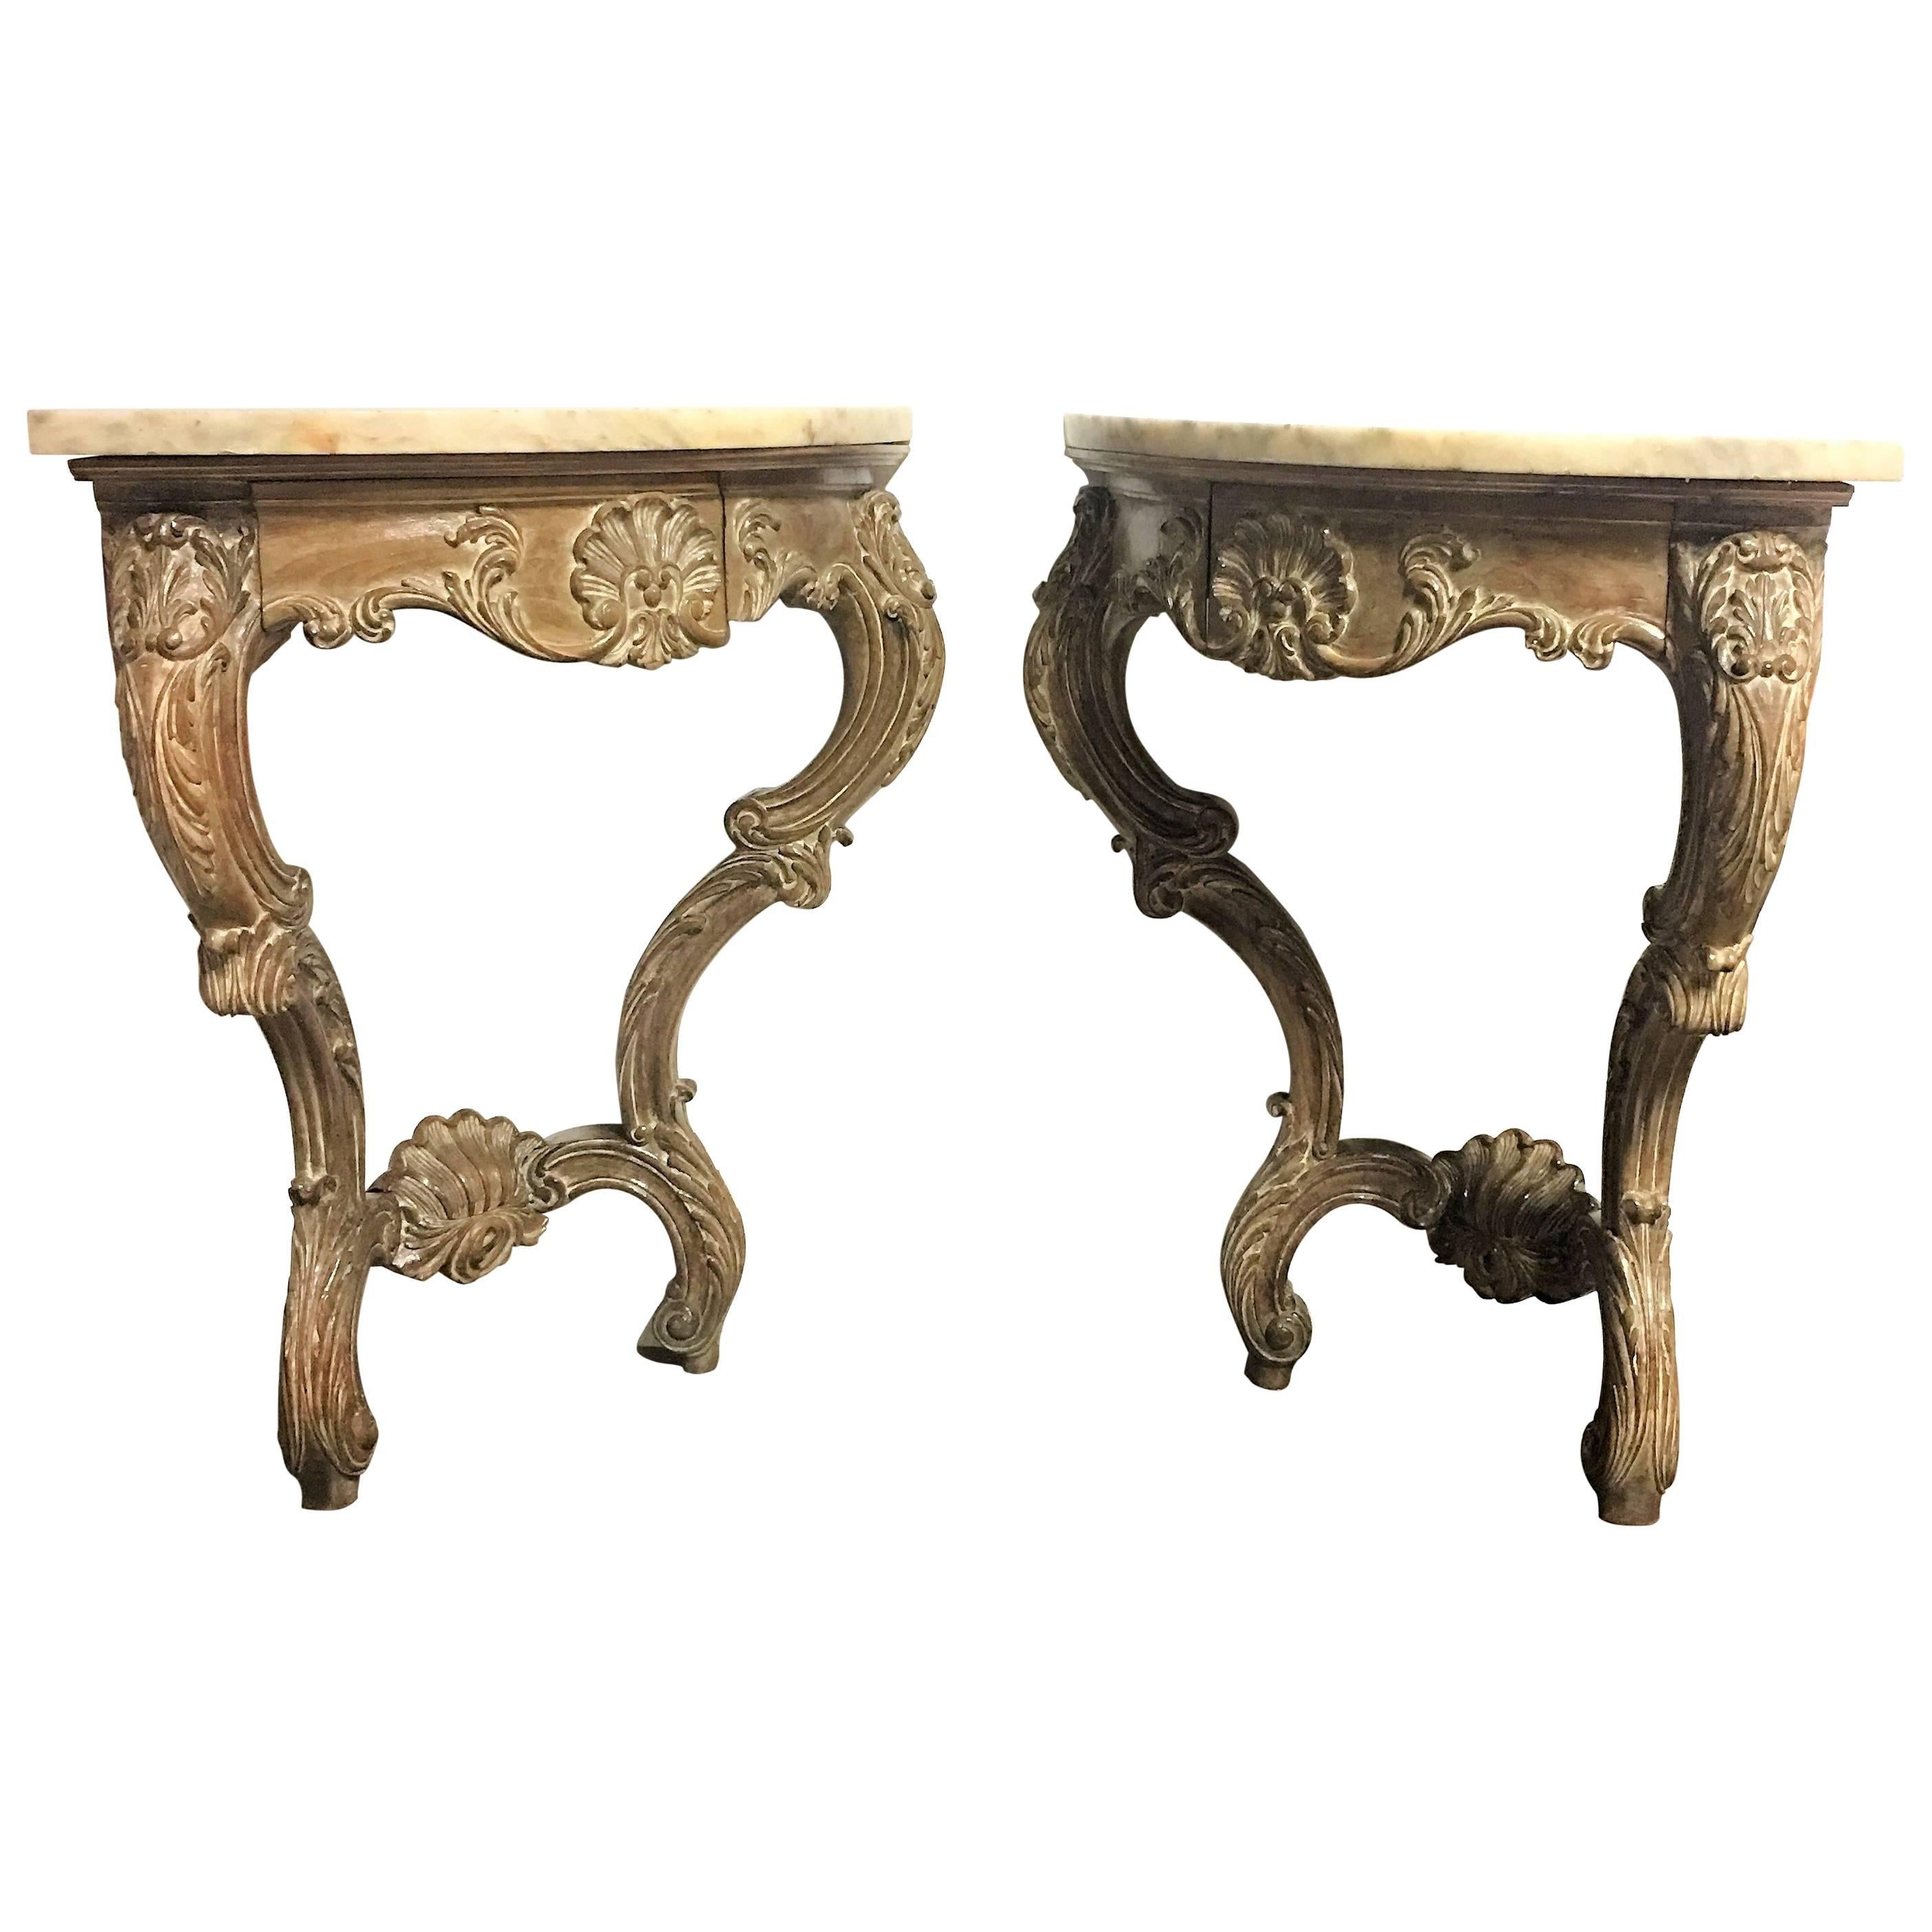 Early 20th Century Rococo French Hand-Carved Pair of Corner Consoles with Drawer